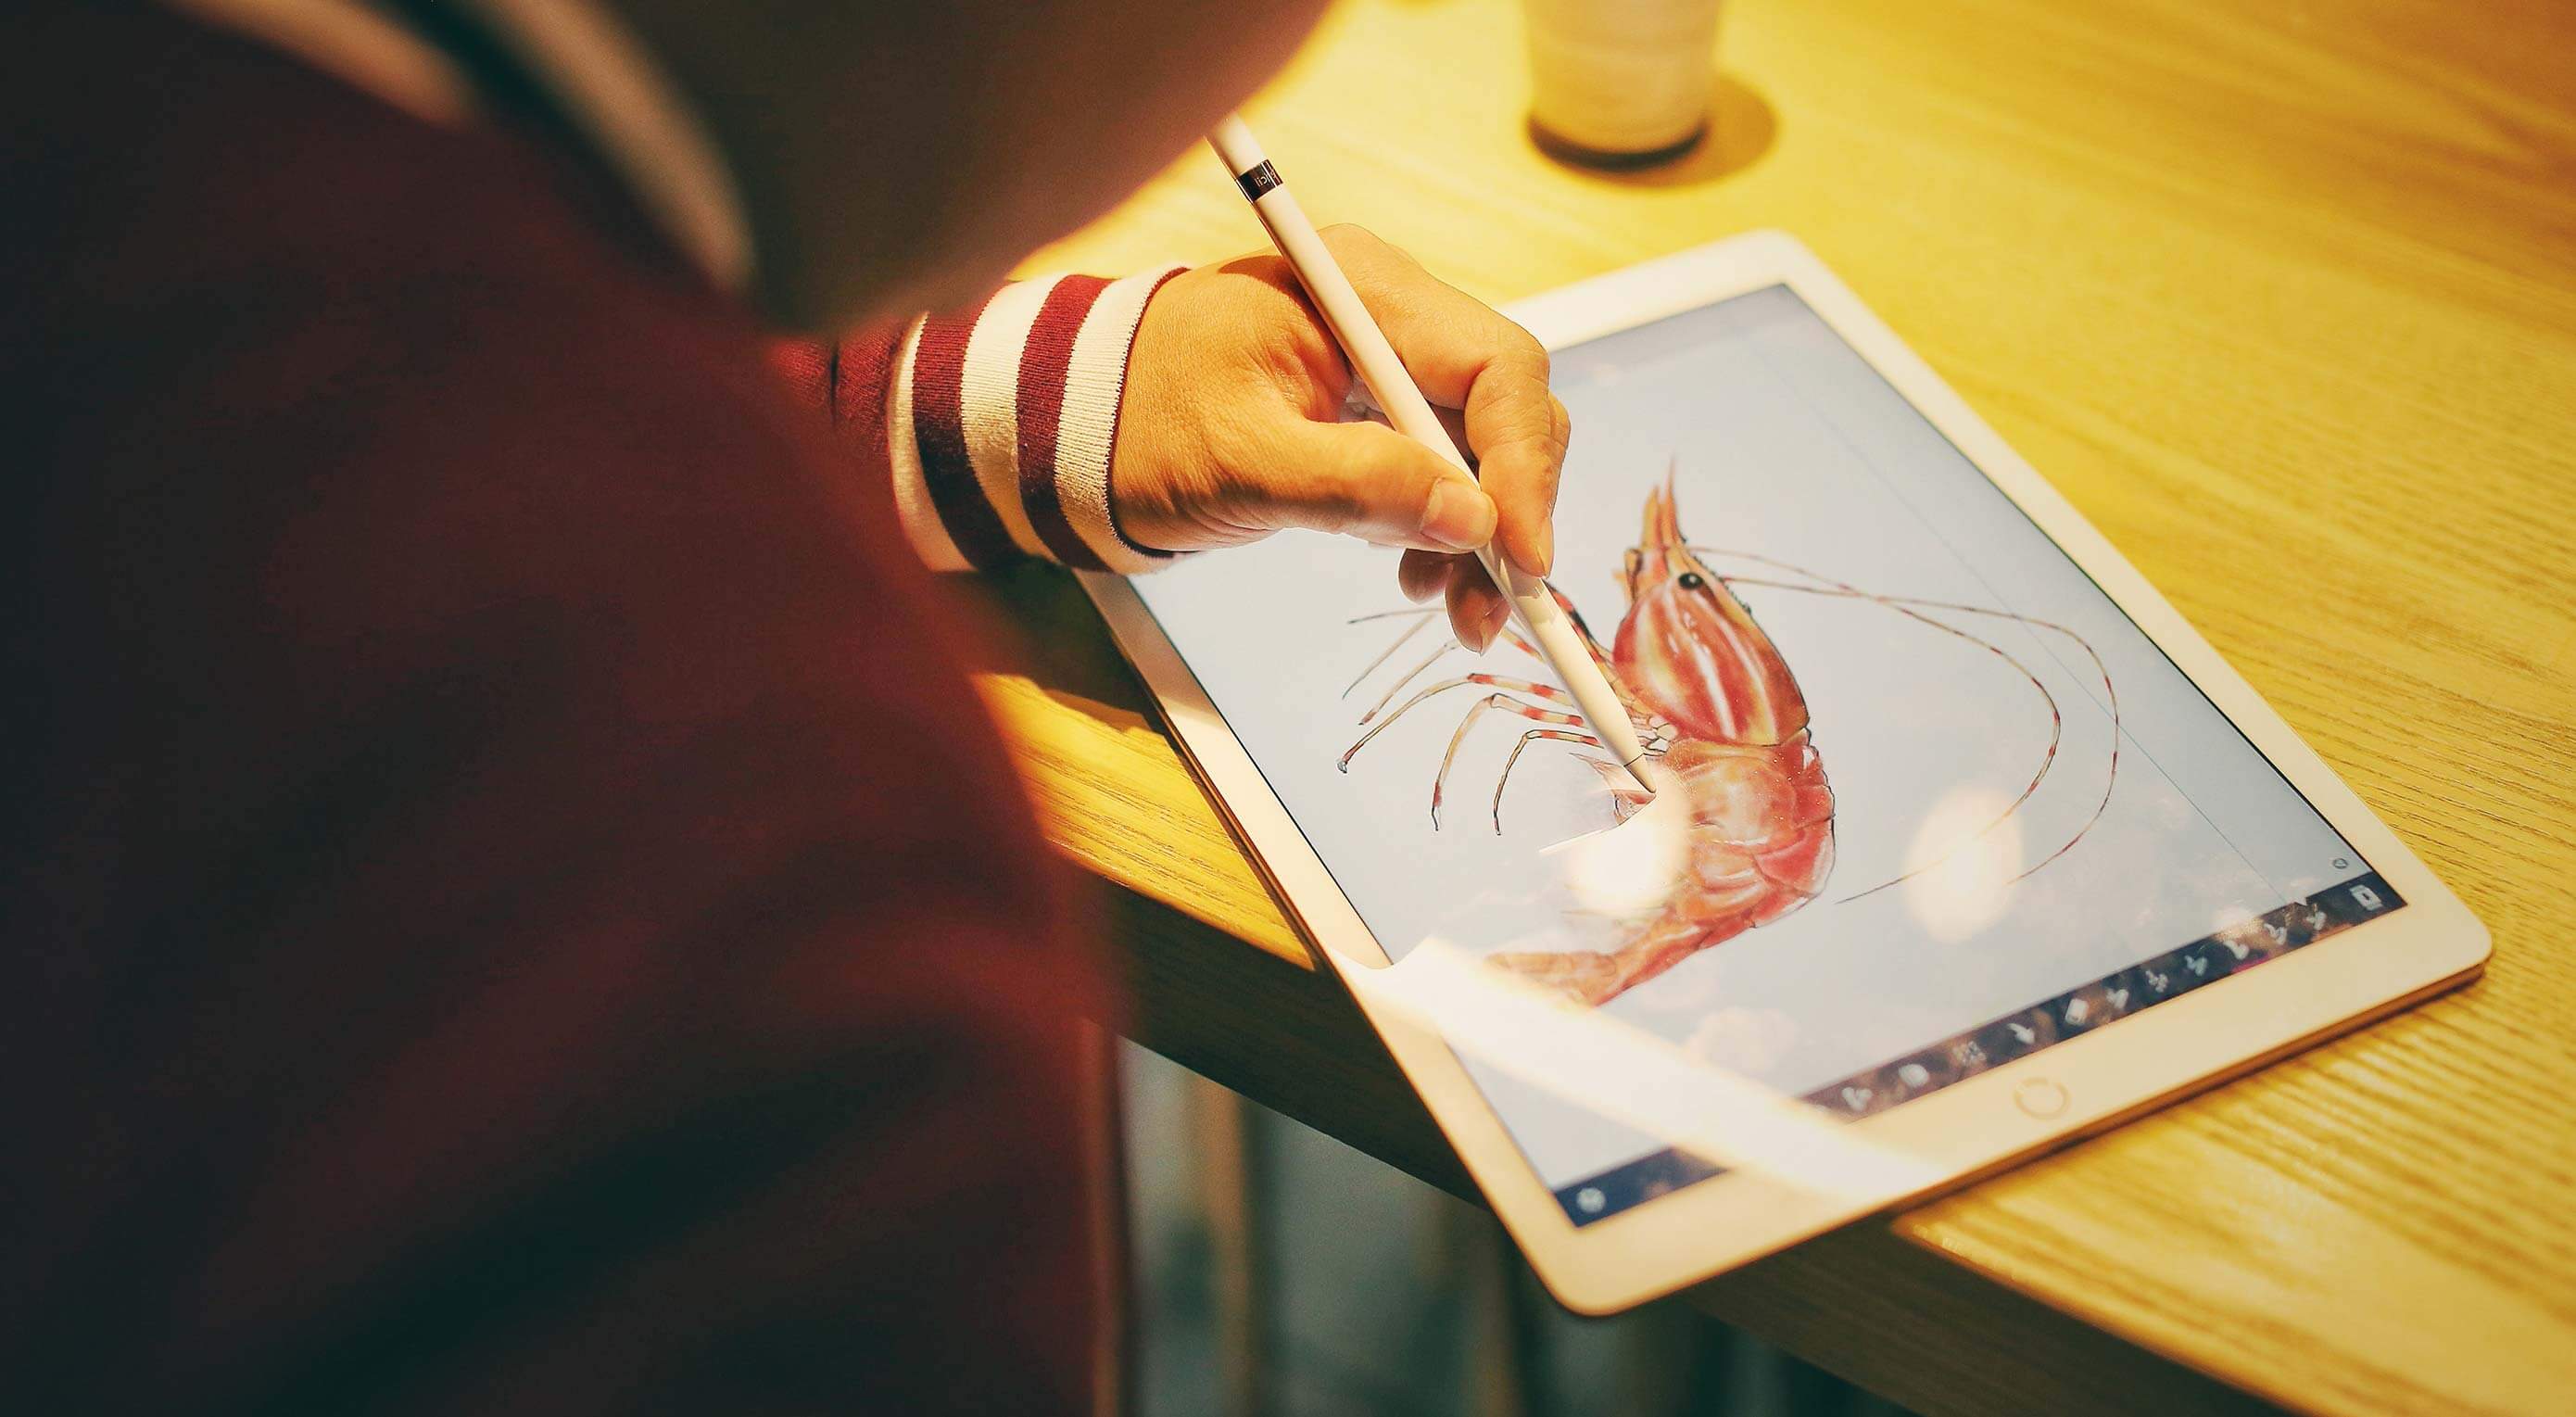 android drawing app like procreate